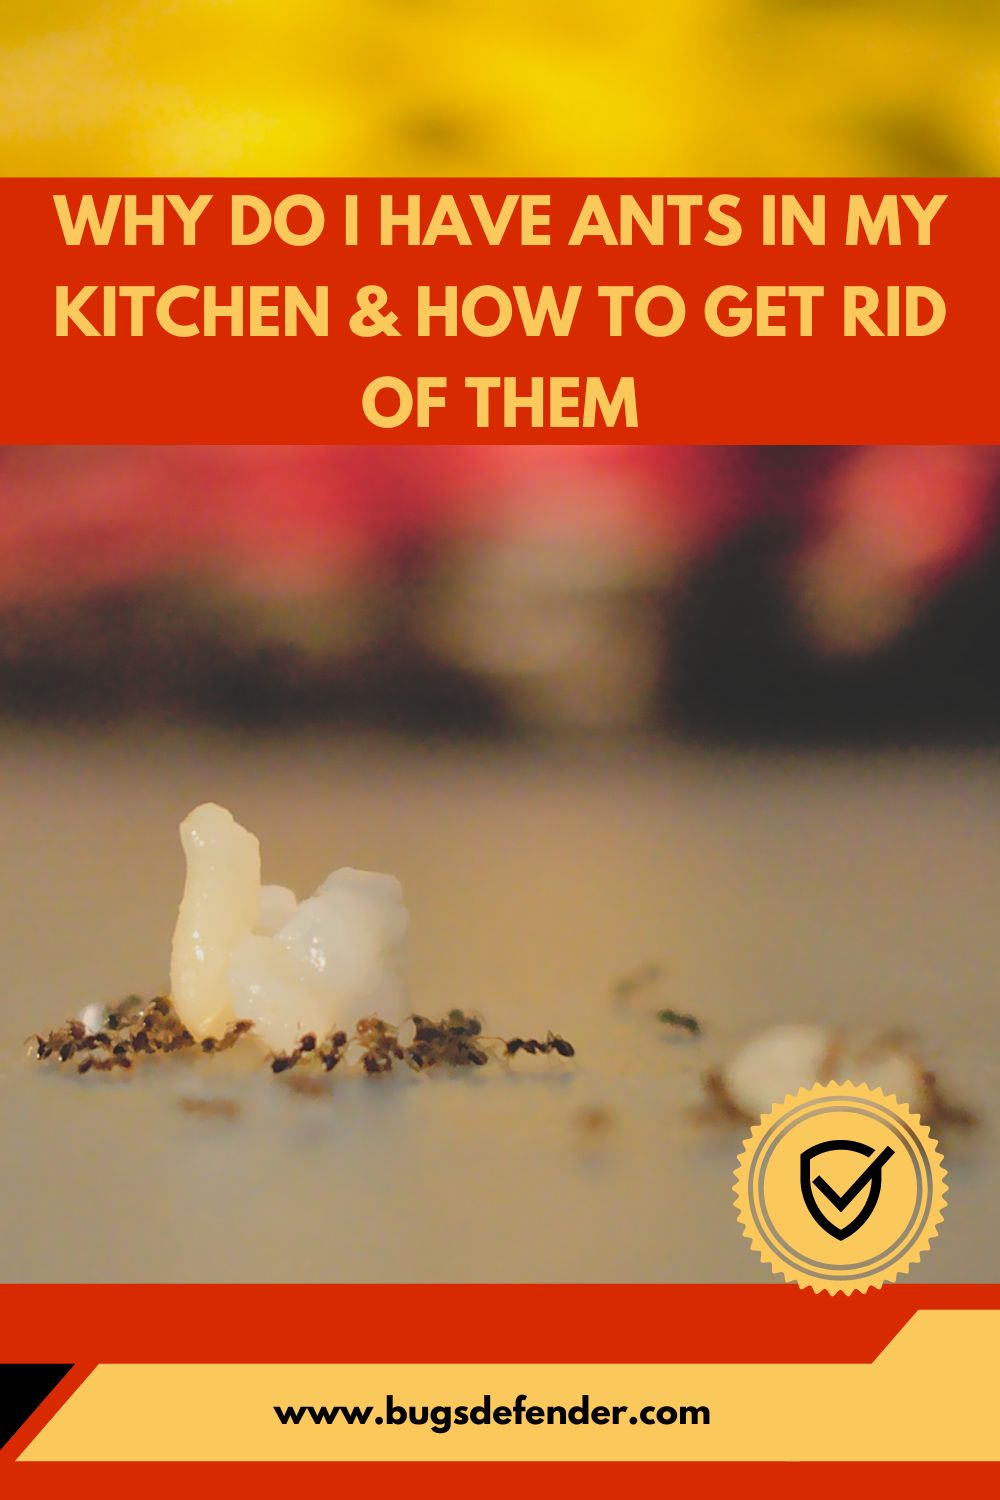 Why Do I Have Ants In My Kitchen & How To Get Rid Of Them pin2